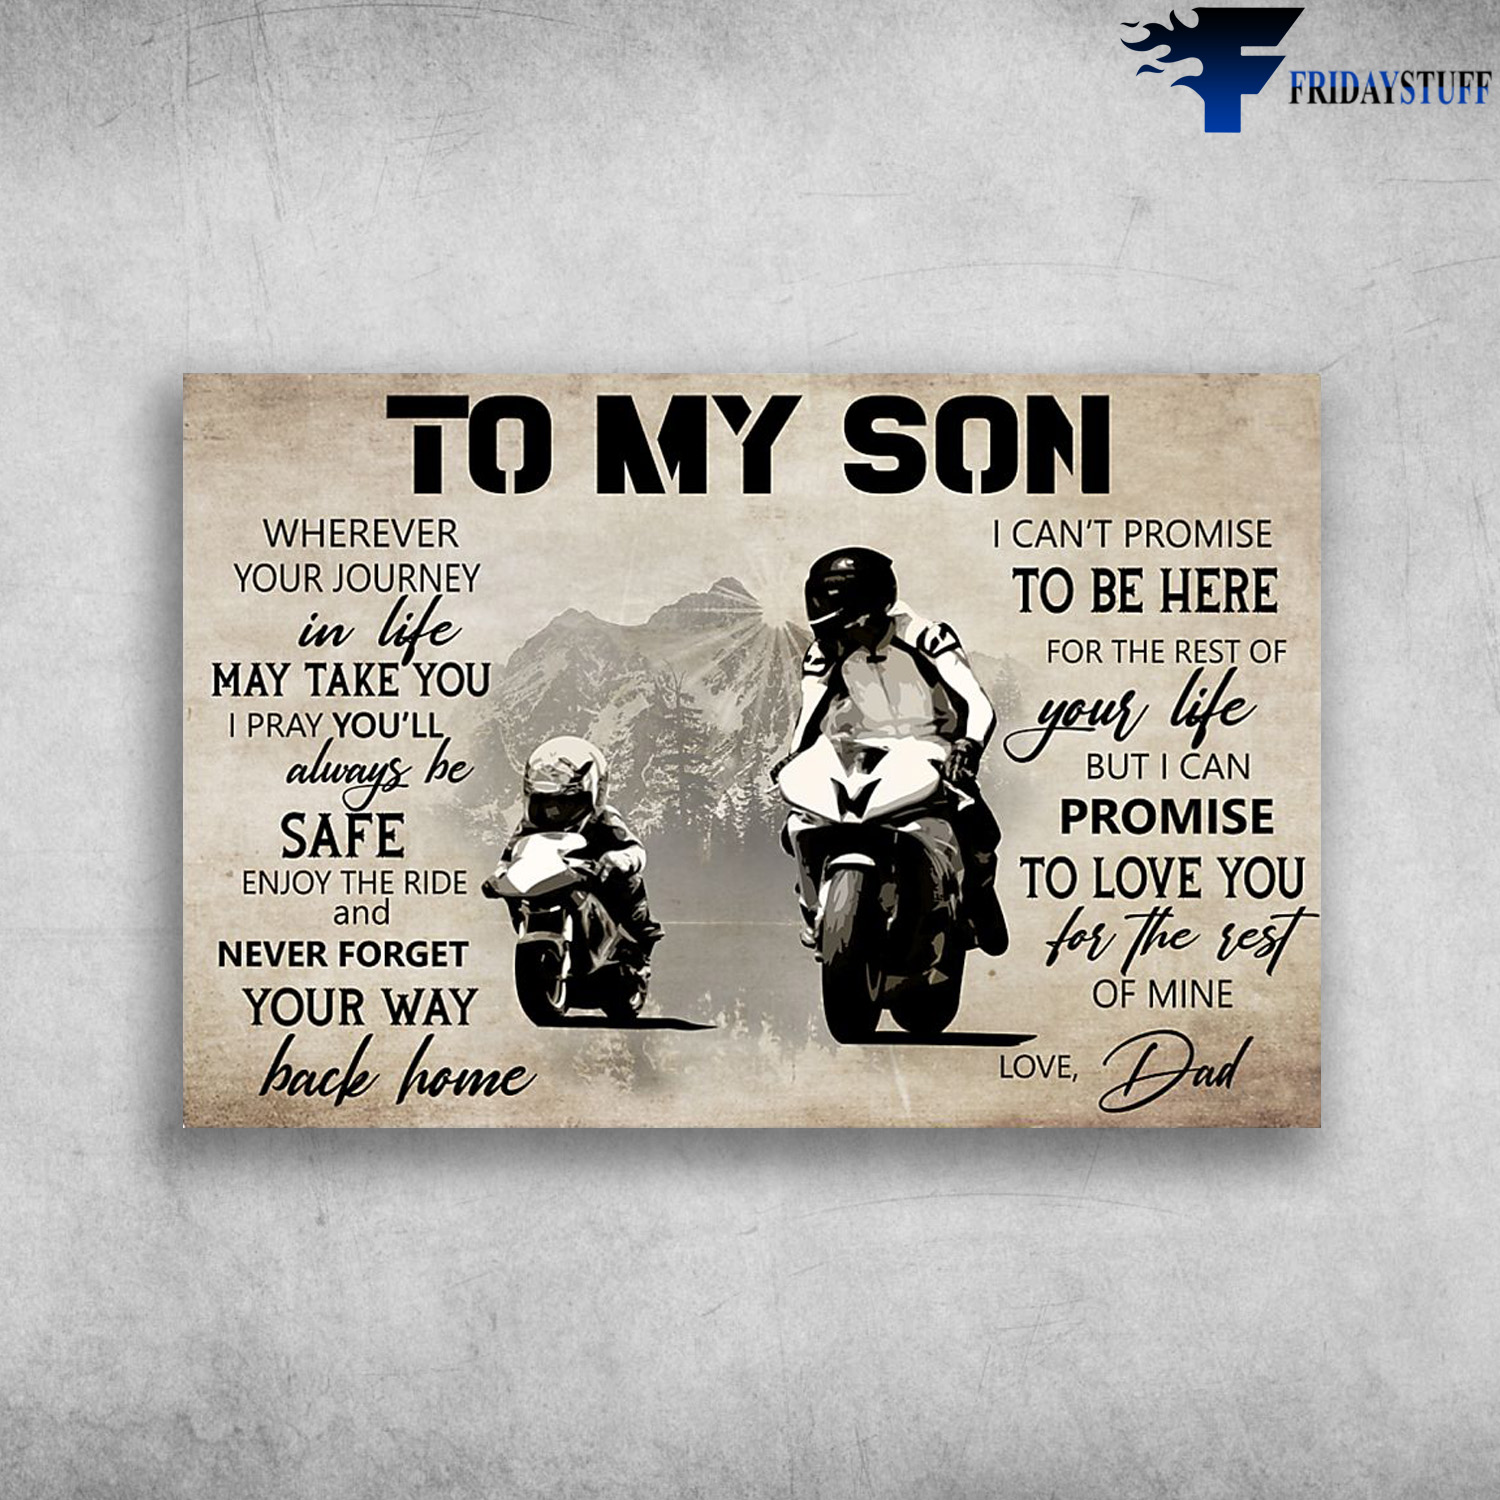 Dad And Son Motorcycling – To My Son, Wherever Your Journey In Life May Take You, I Pray You’ll Always Be Safe, Enjoy The Ride And Never Forget Your Way Back Home, I Can’t Promise To Be Here For The Rest Of Your Life